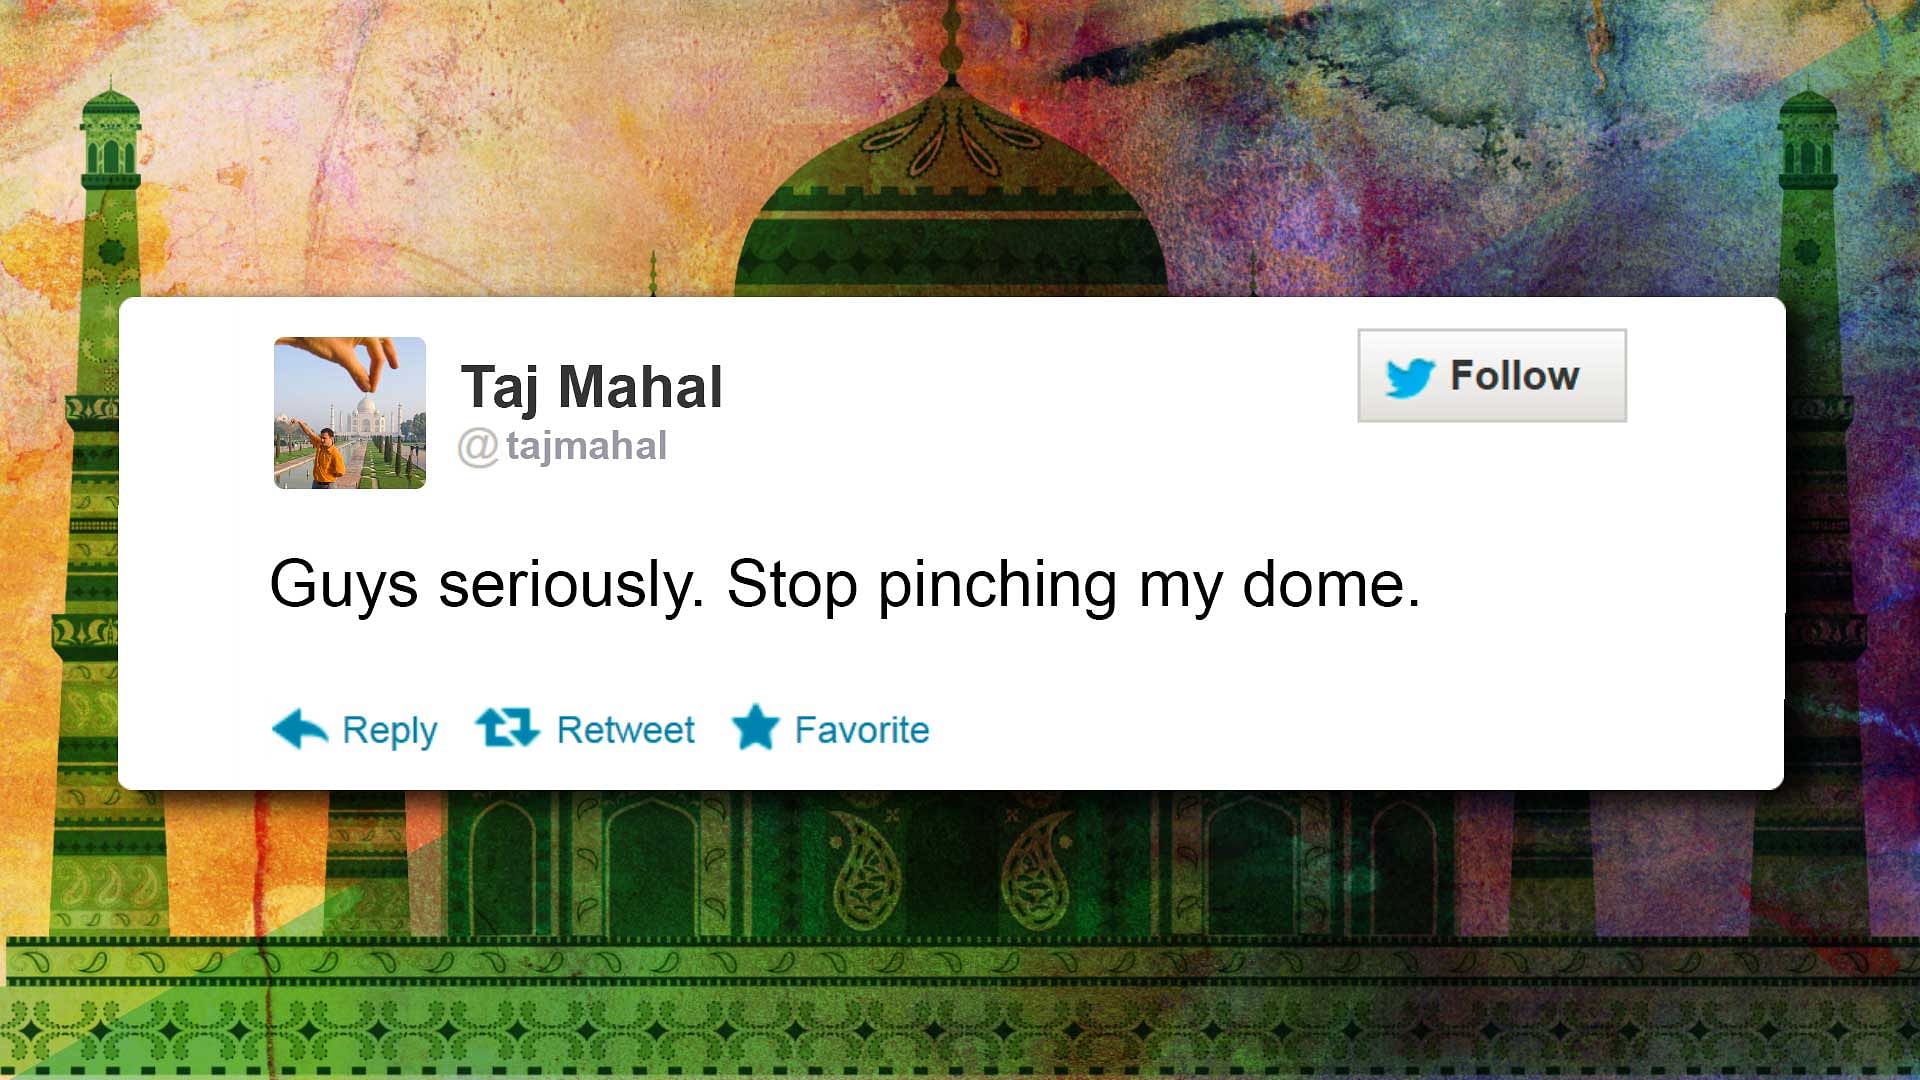 What all would have the Taj Mahal posted on its twitter account, had it been socially active&nbsp;through the many years of history.&nbsp;